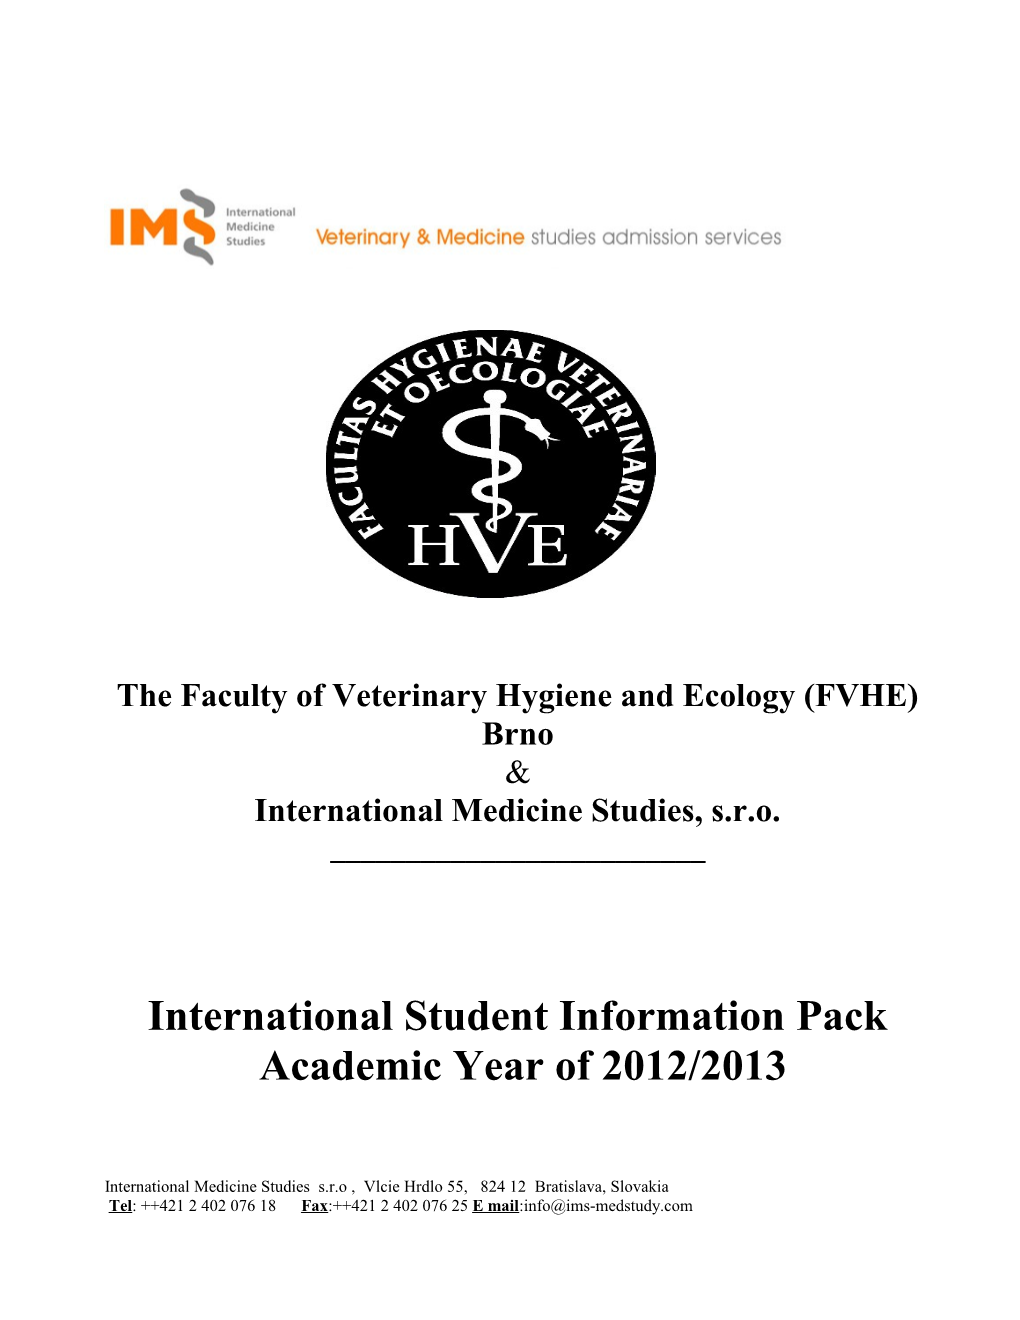 The Faculty of Veterinary Hygiene and Ecology (FVHE)